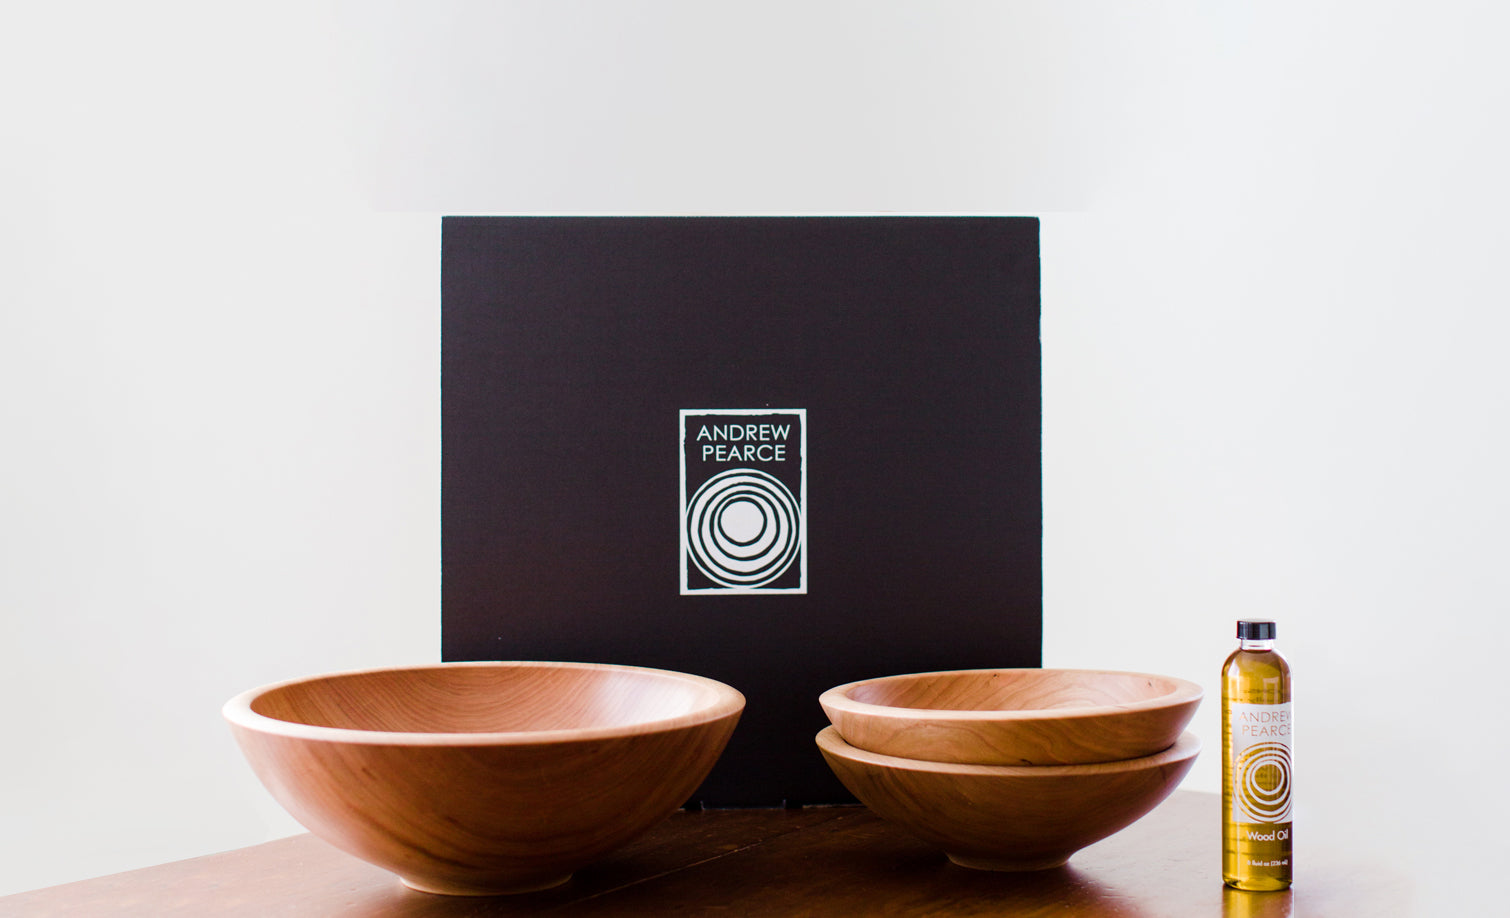 Large wood bowl with two small wood salad bowls shown with food safe wood oil and an Andrew Pearce Bowls Gift Box